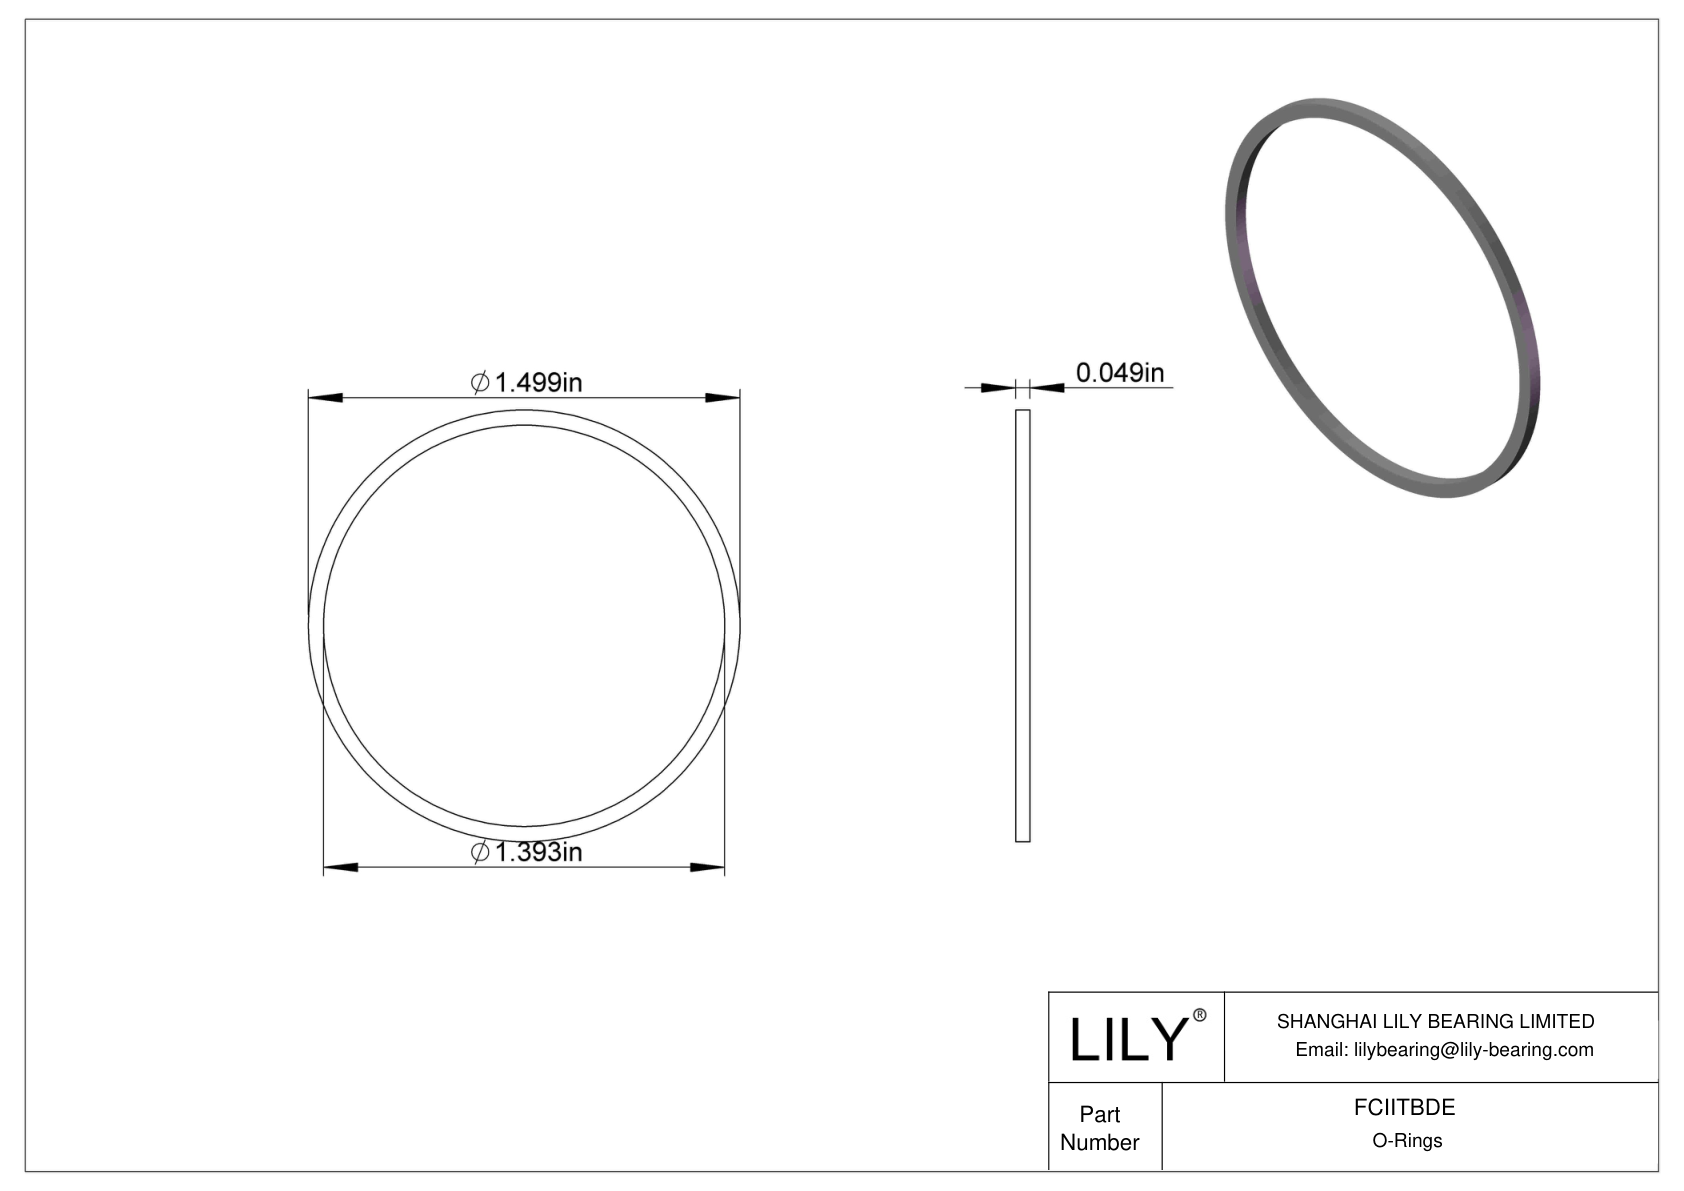 FCIITBDE O-Ring Backup Rings cad drawing